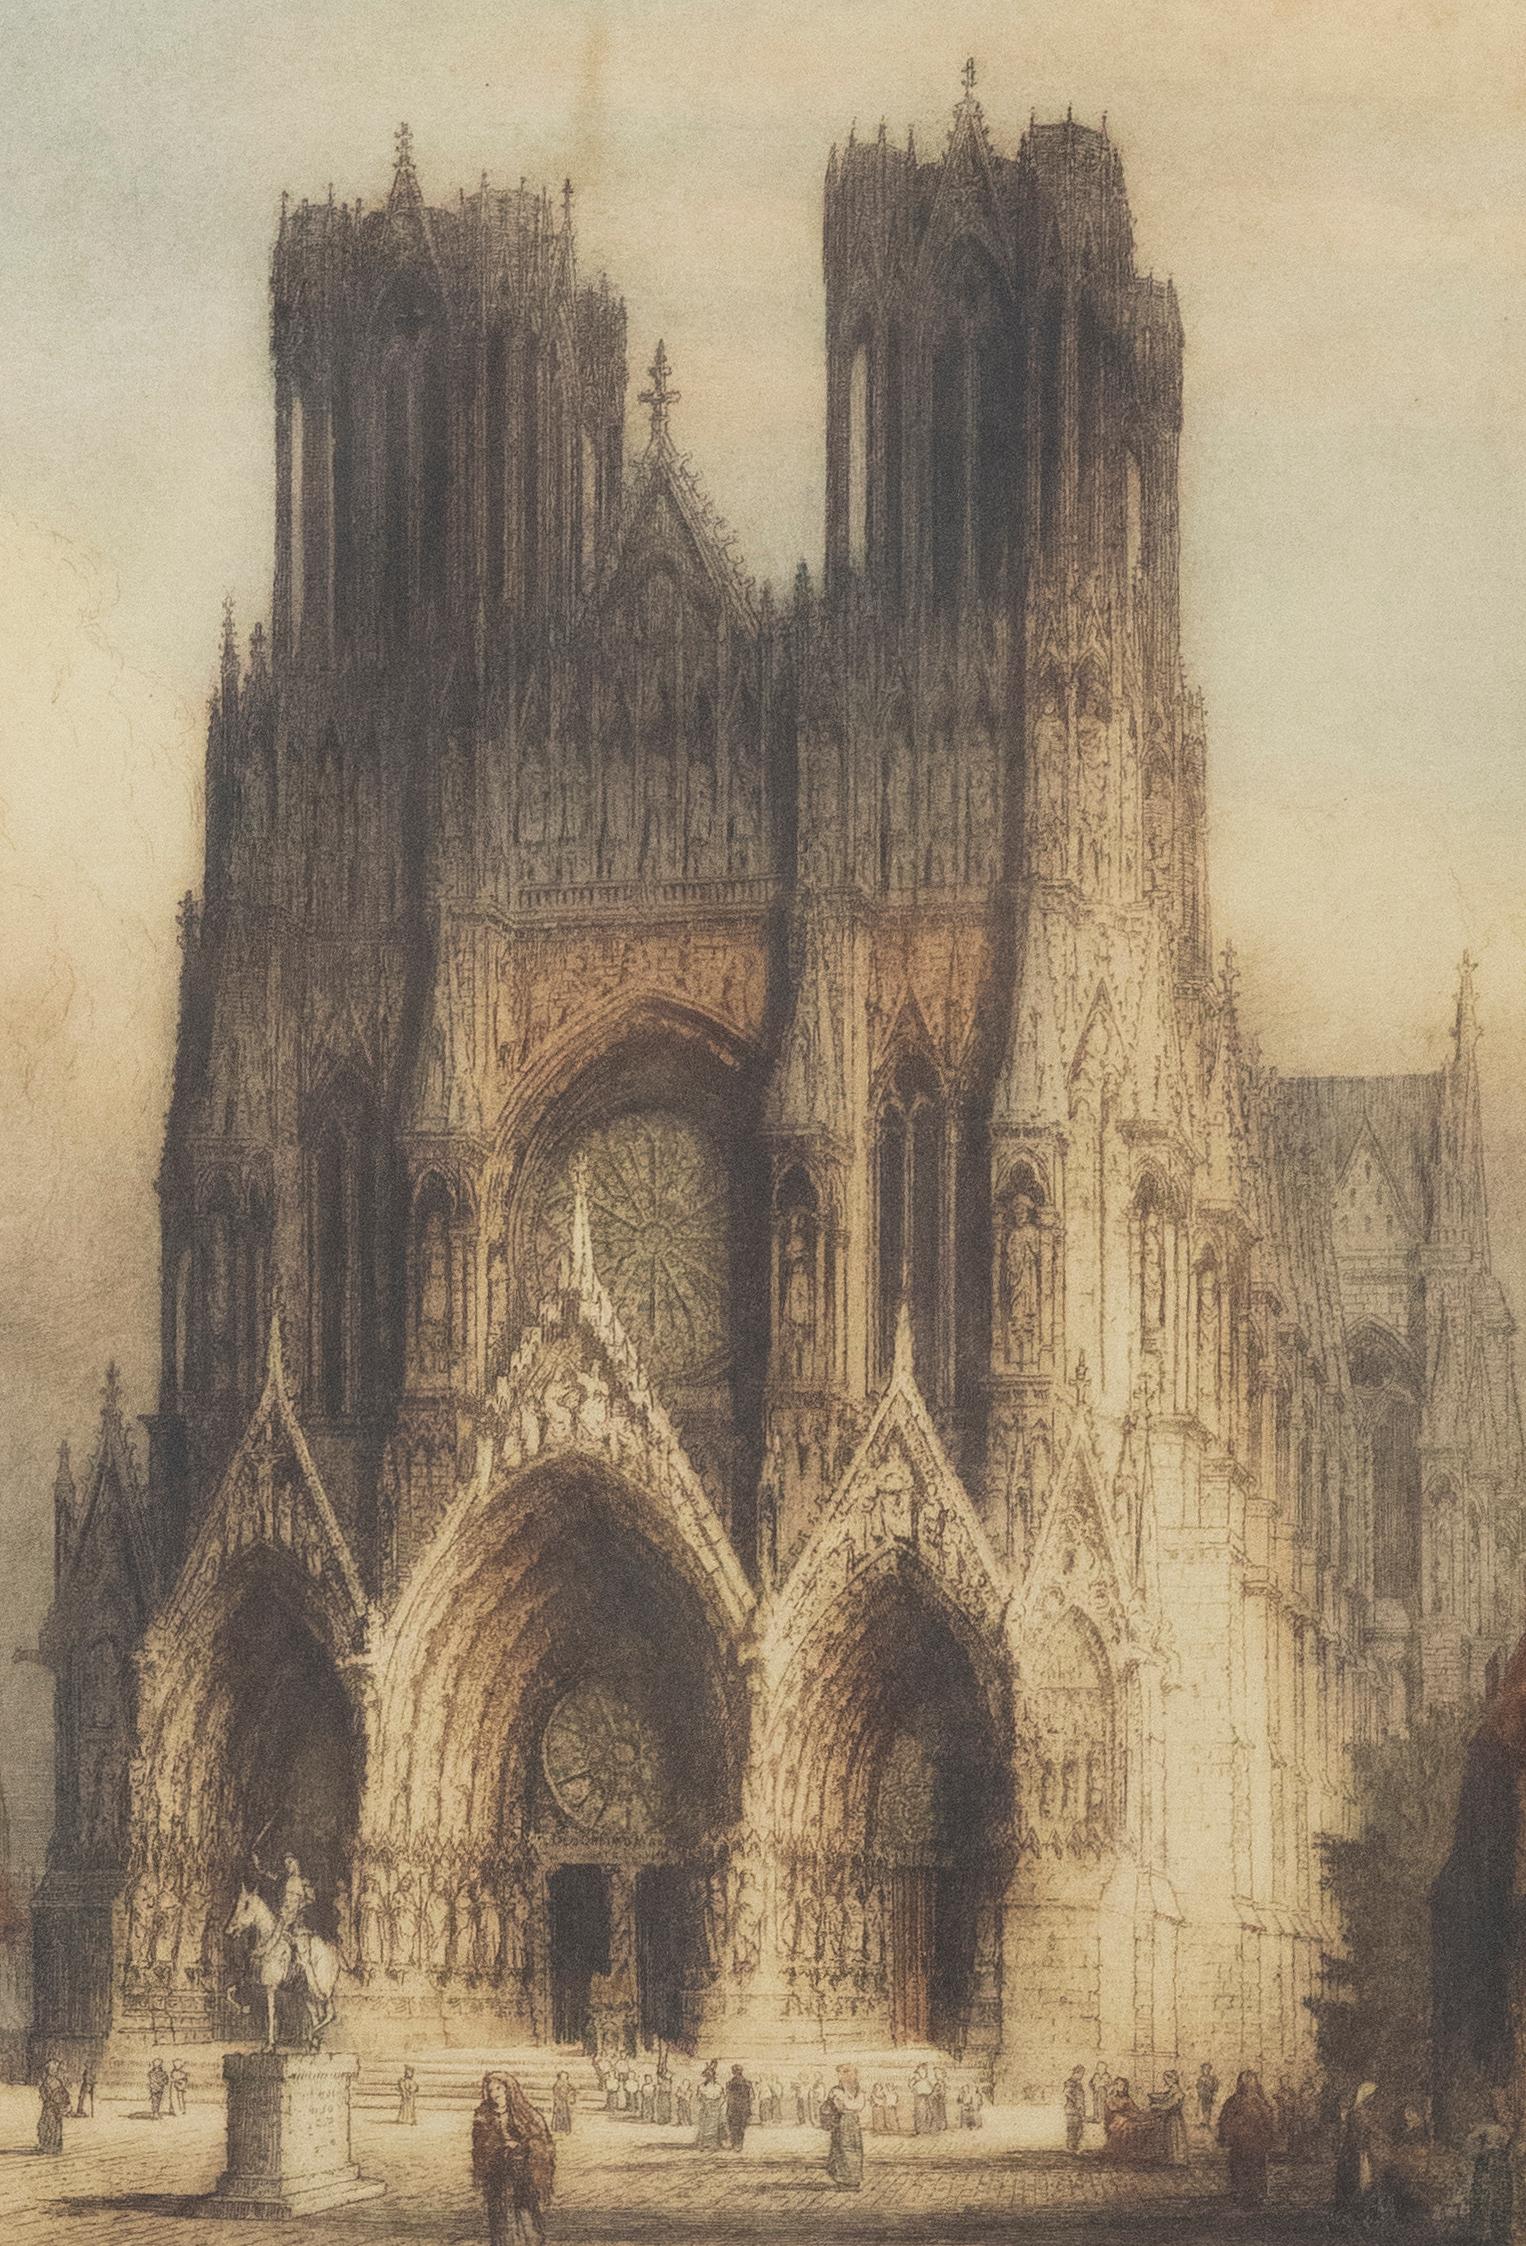 A charming hand tinted etching depicting Cathédrale Notre-Dame de Reims. Signed and titled in graphite below the plate lines. Presented in a gilt frame with ornate acanthus scrolling. On paper.
